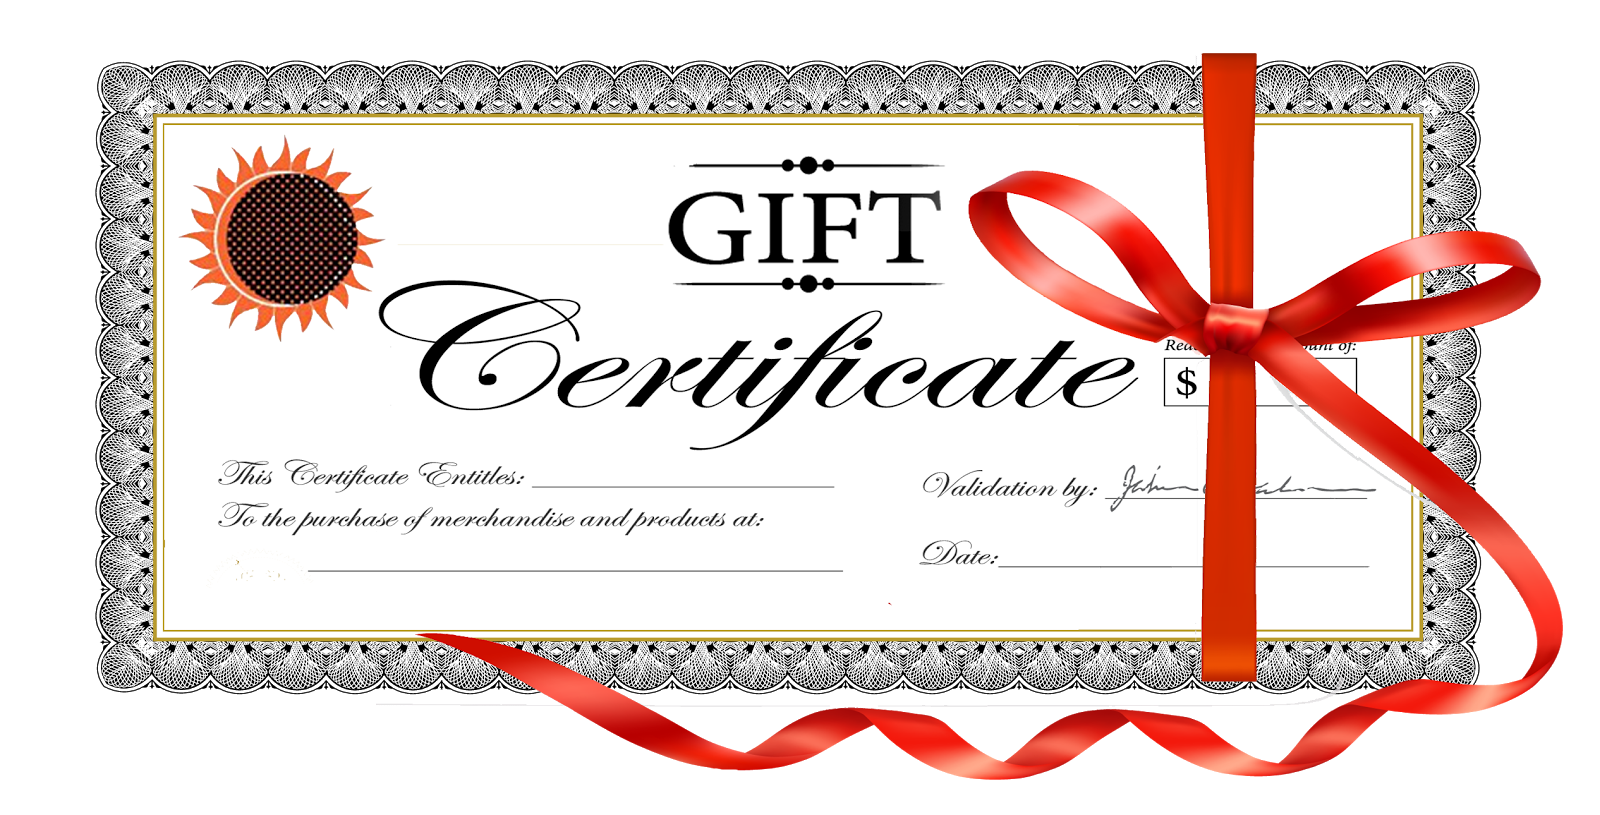 Gift Certificate - Knights of Columbus Supplies